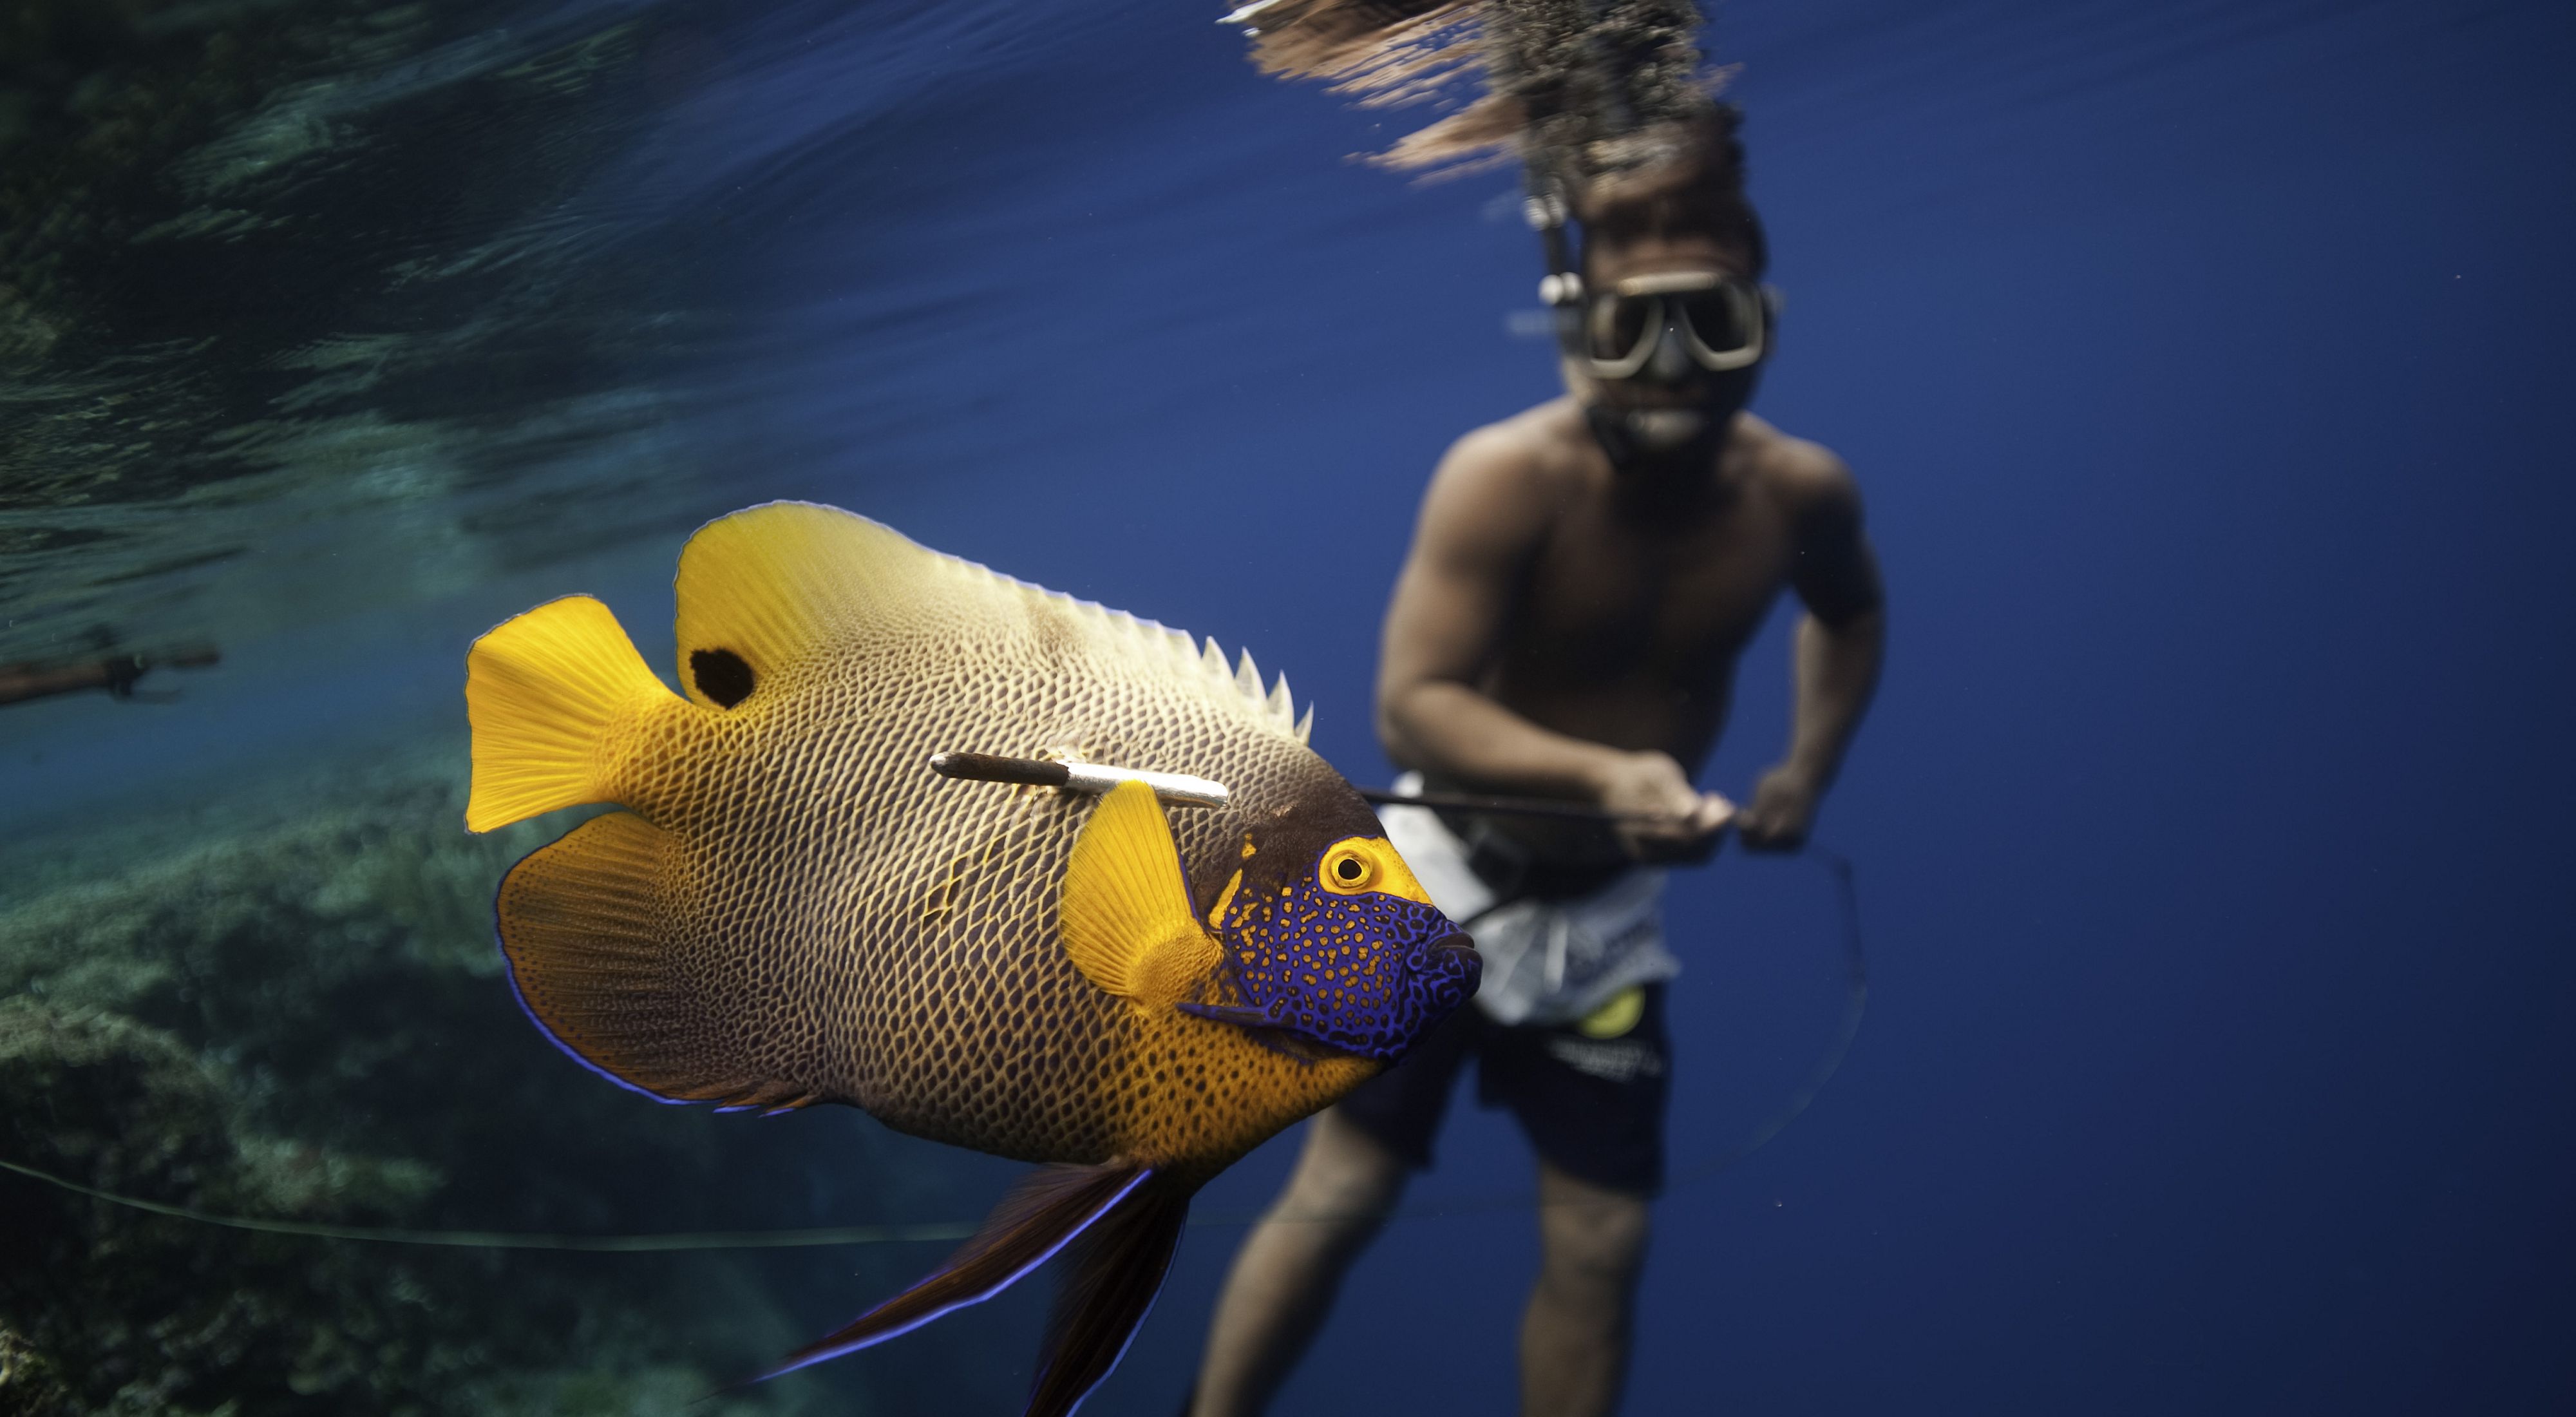 A local speargun fisherman in Micronesia catches reef fish like parrot fish and trivali to feed his family, friends and colleagues.